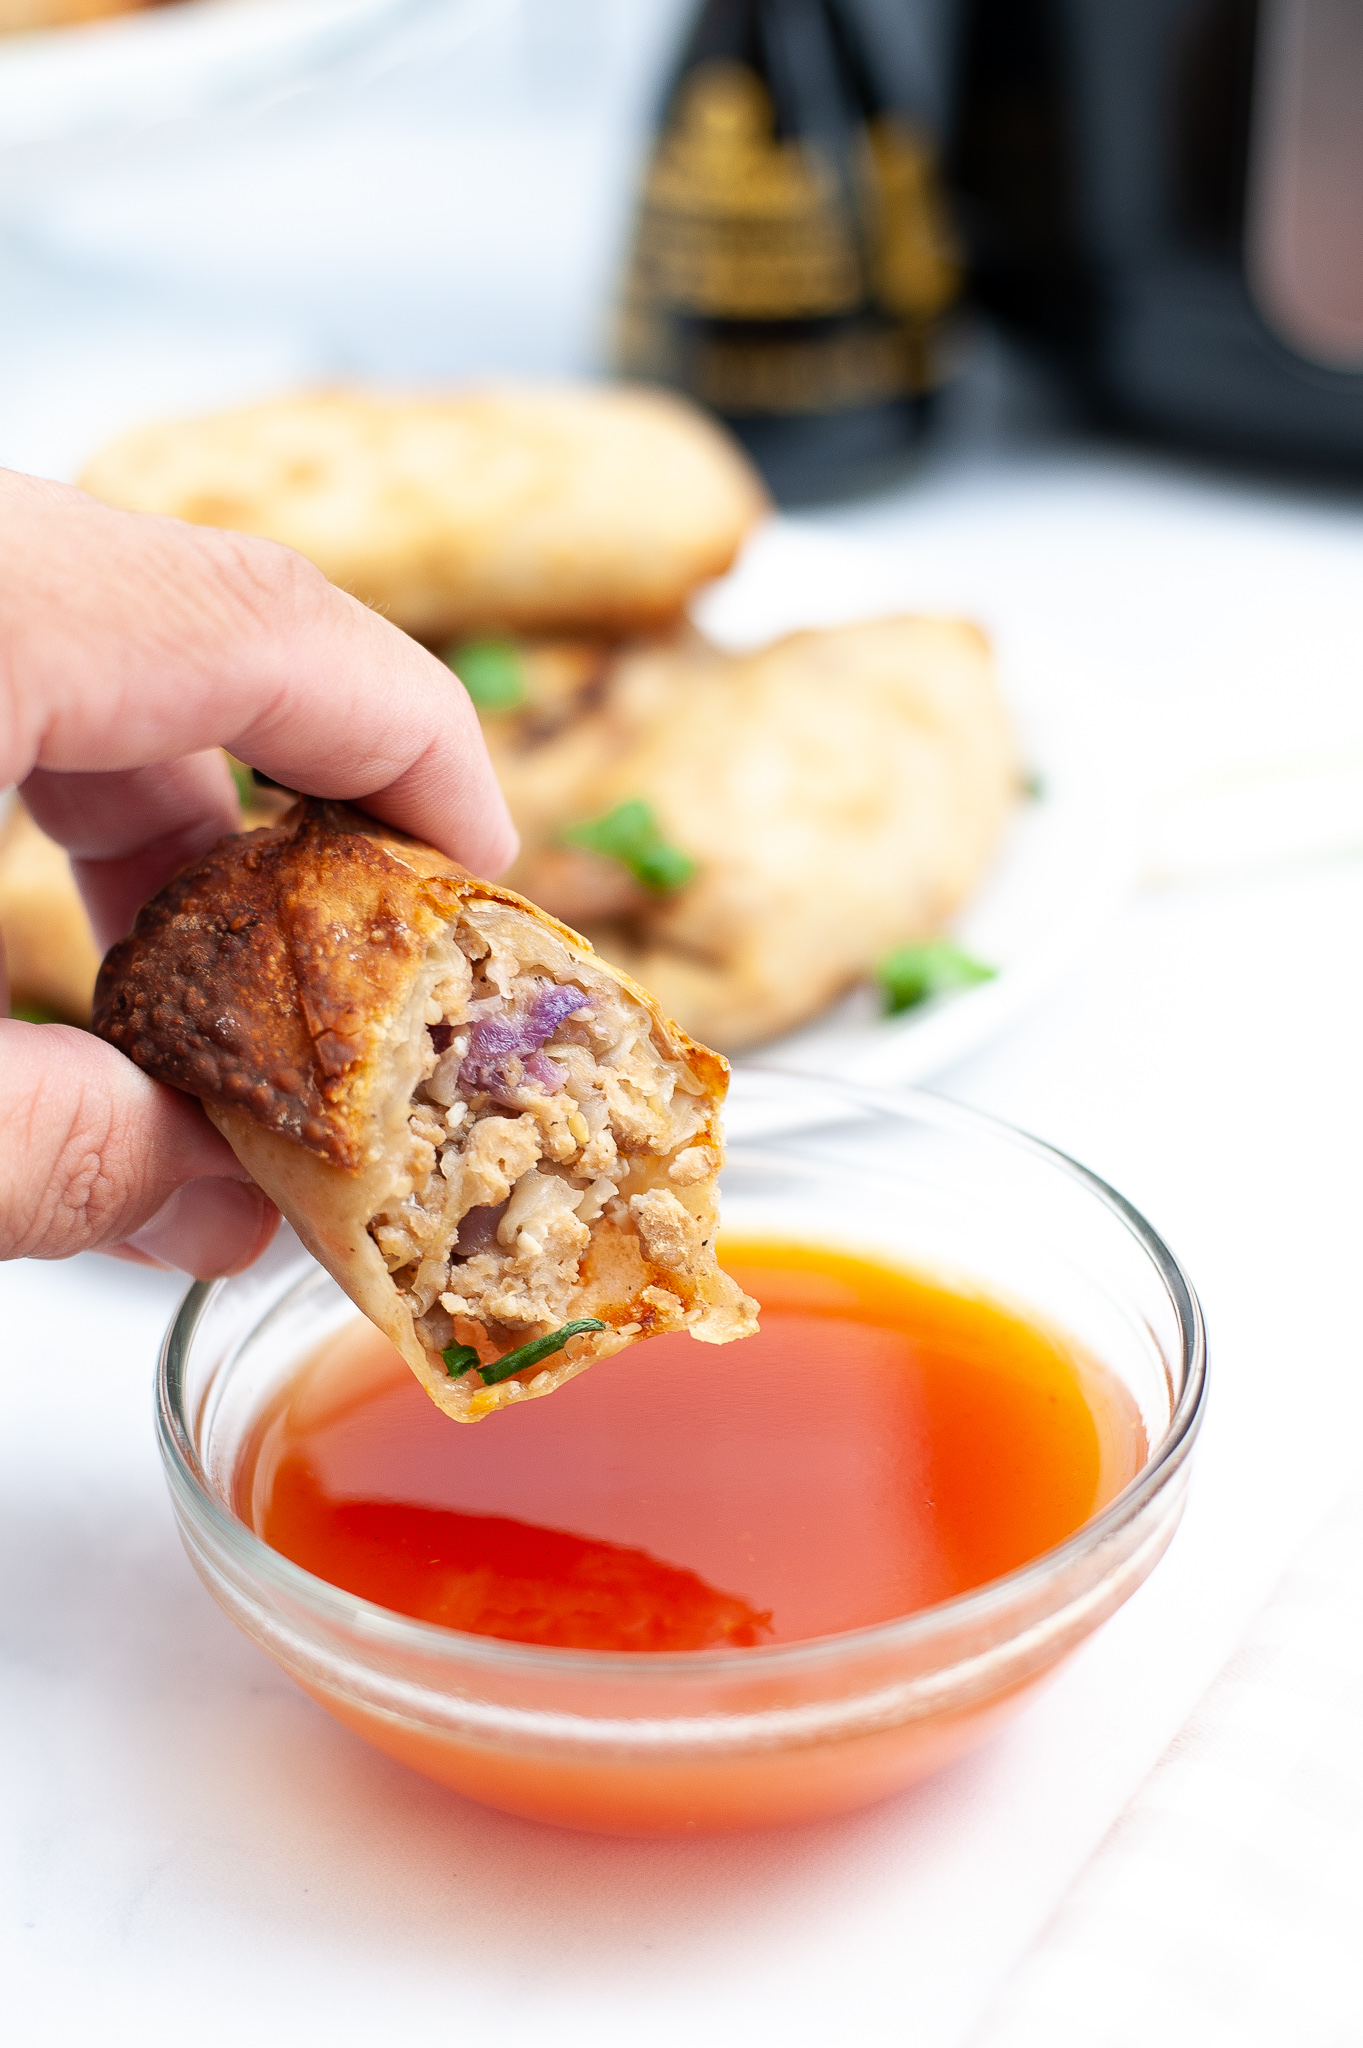 Piece of Air Fryer Chicken Egg Roll dipped into sauce.